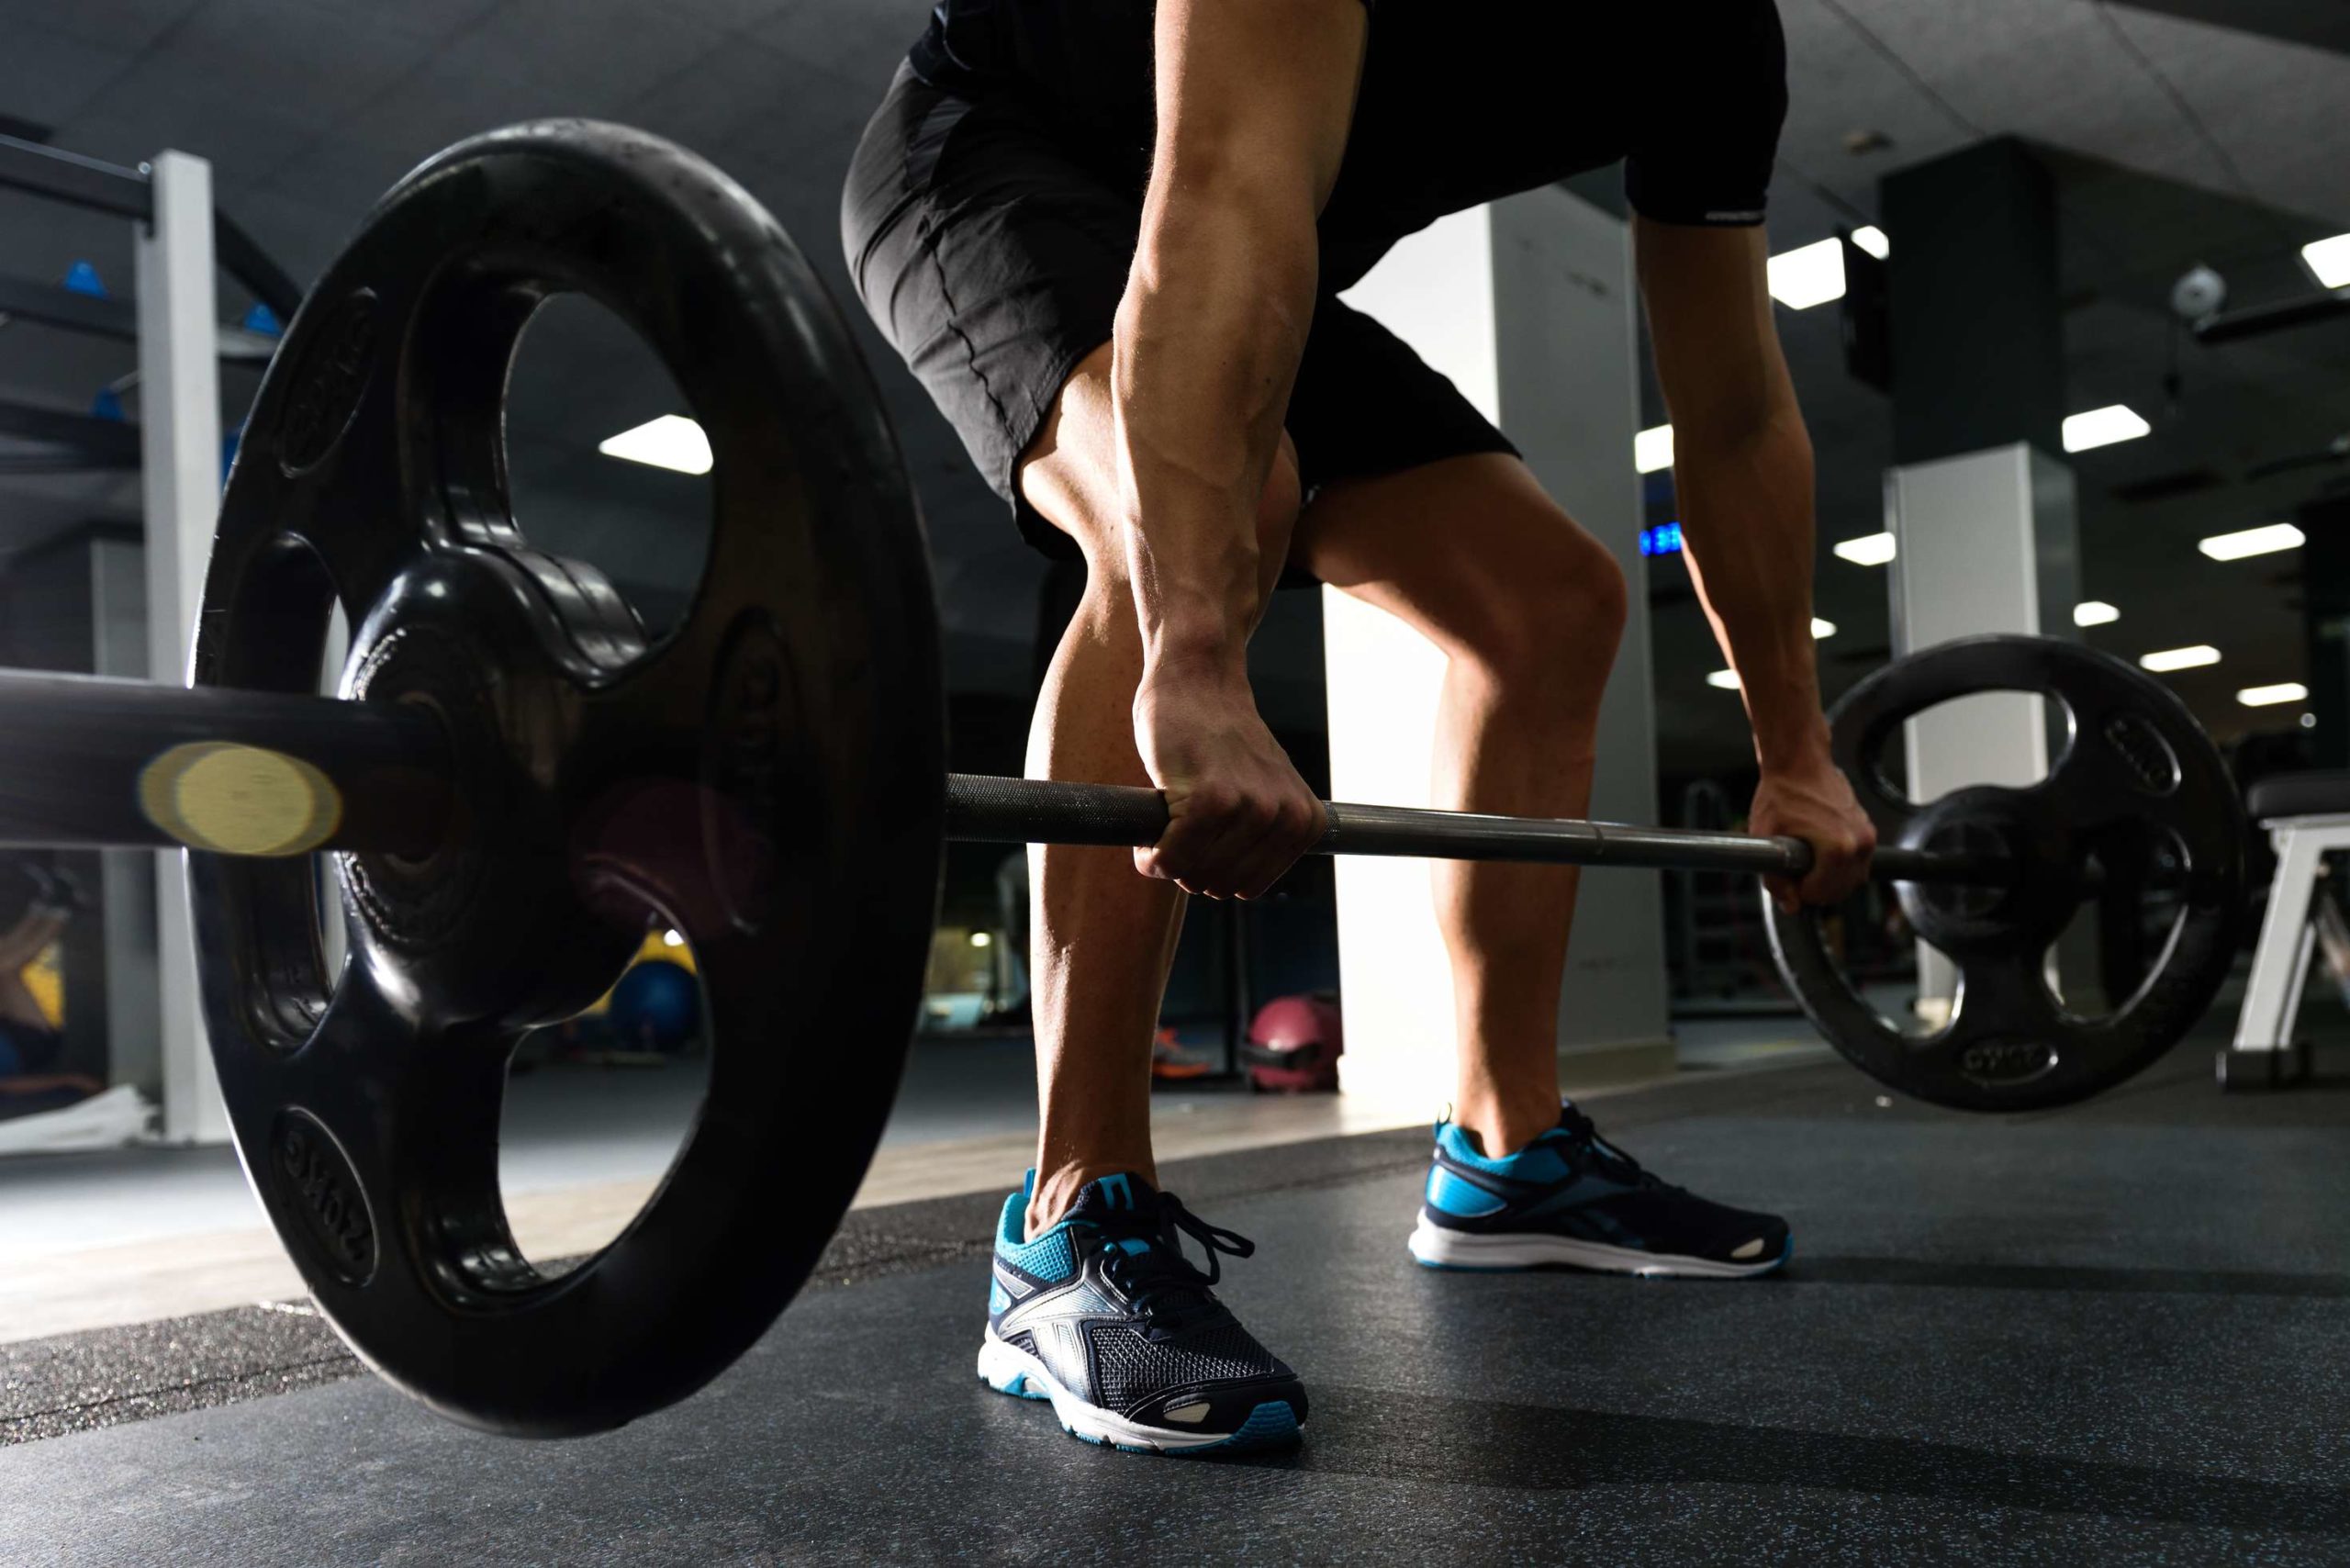 The optimal speed of movement during strength training